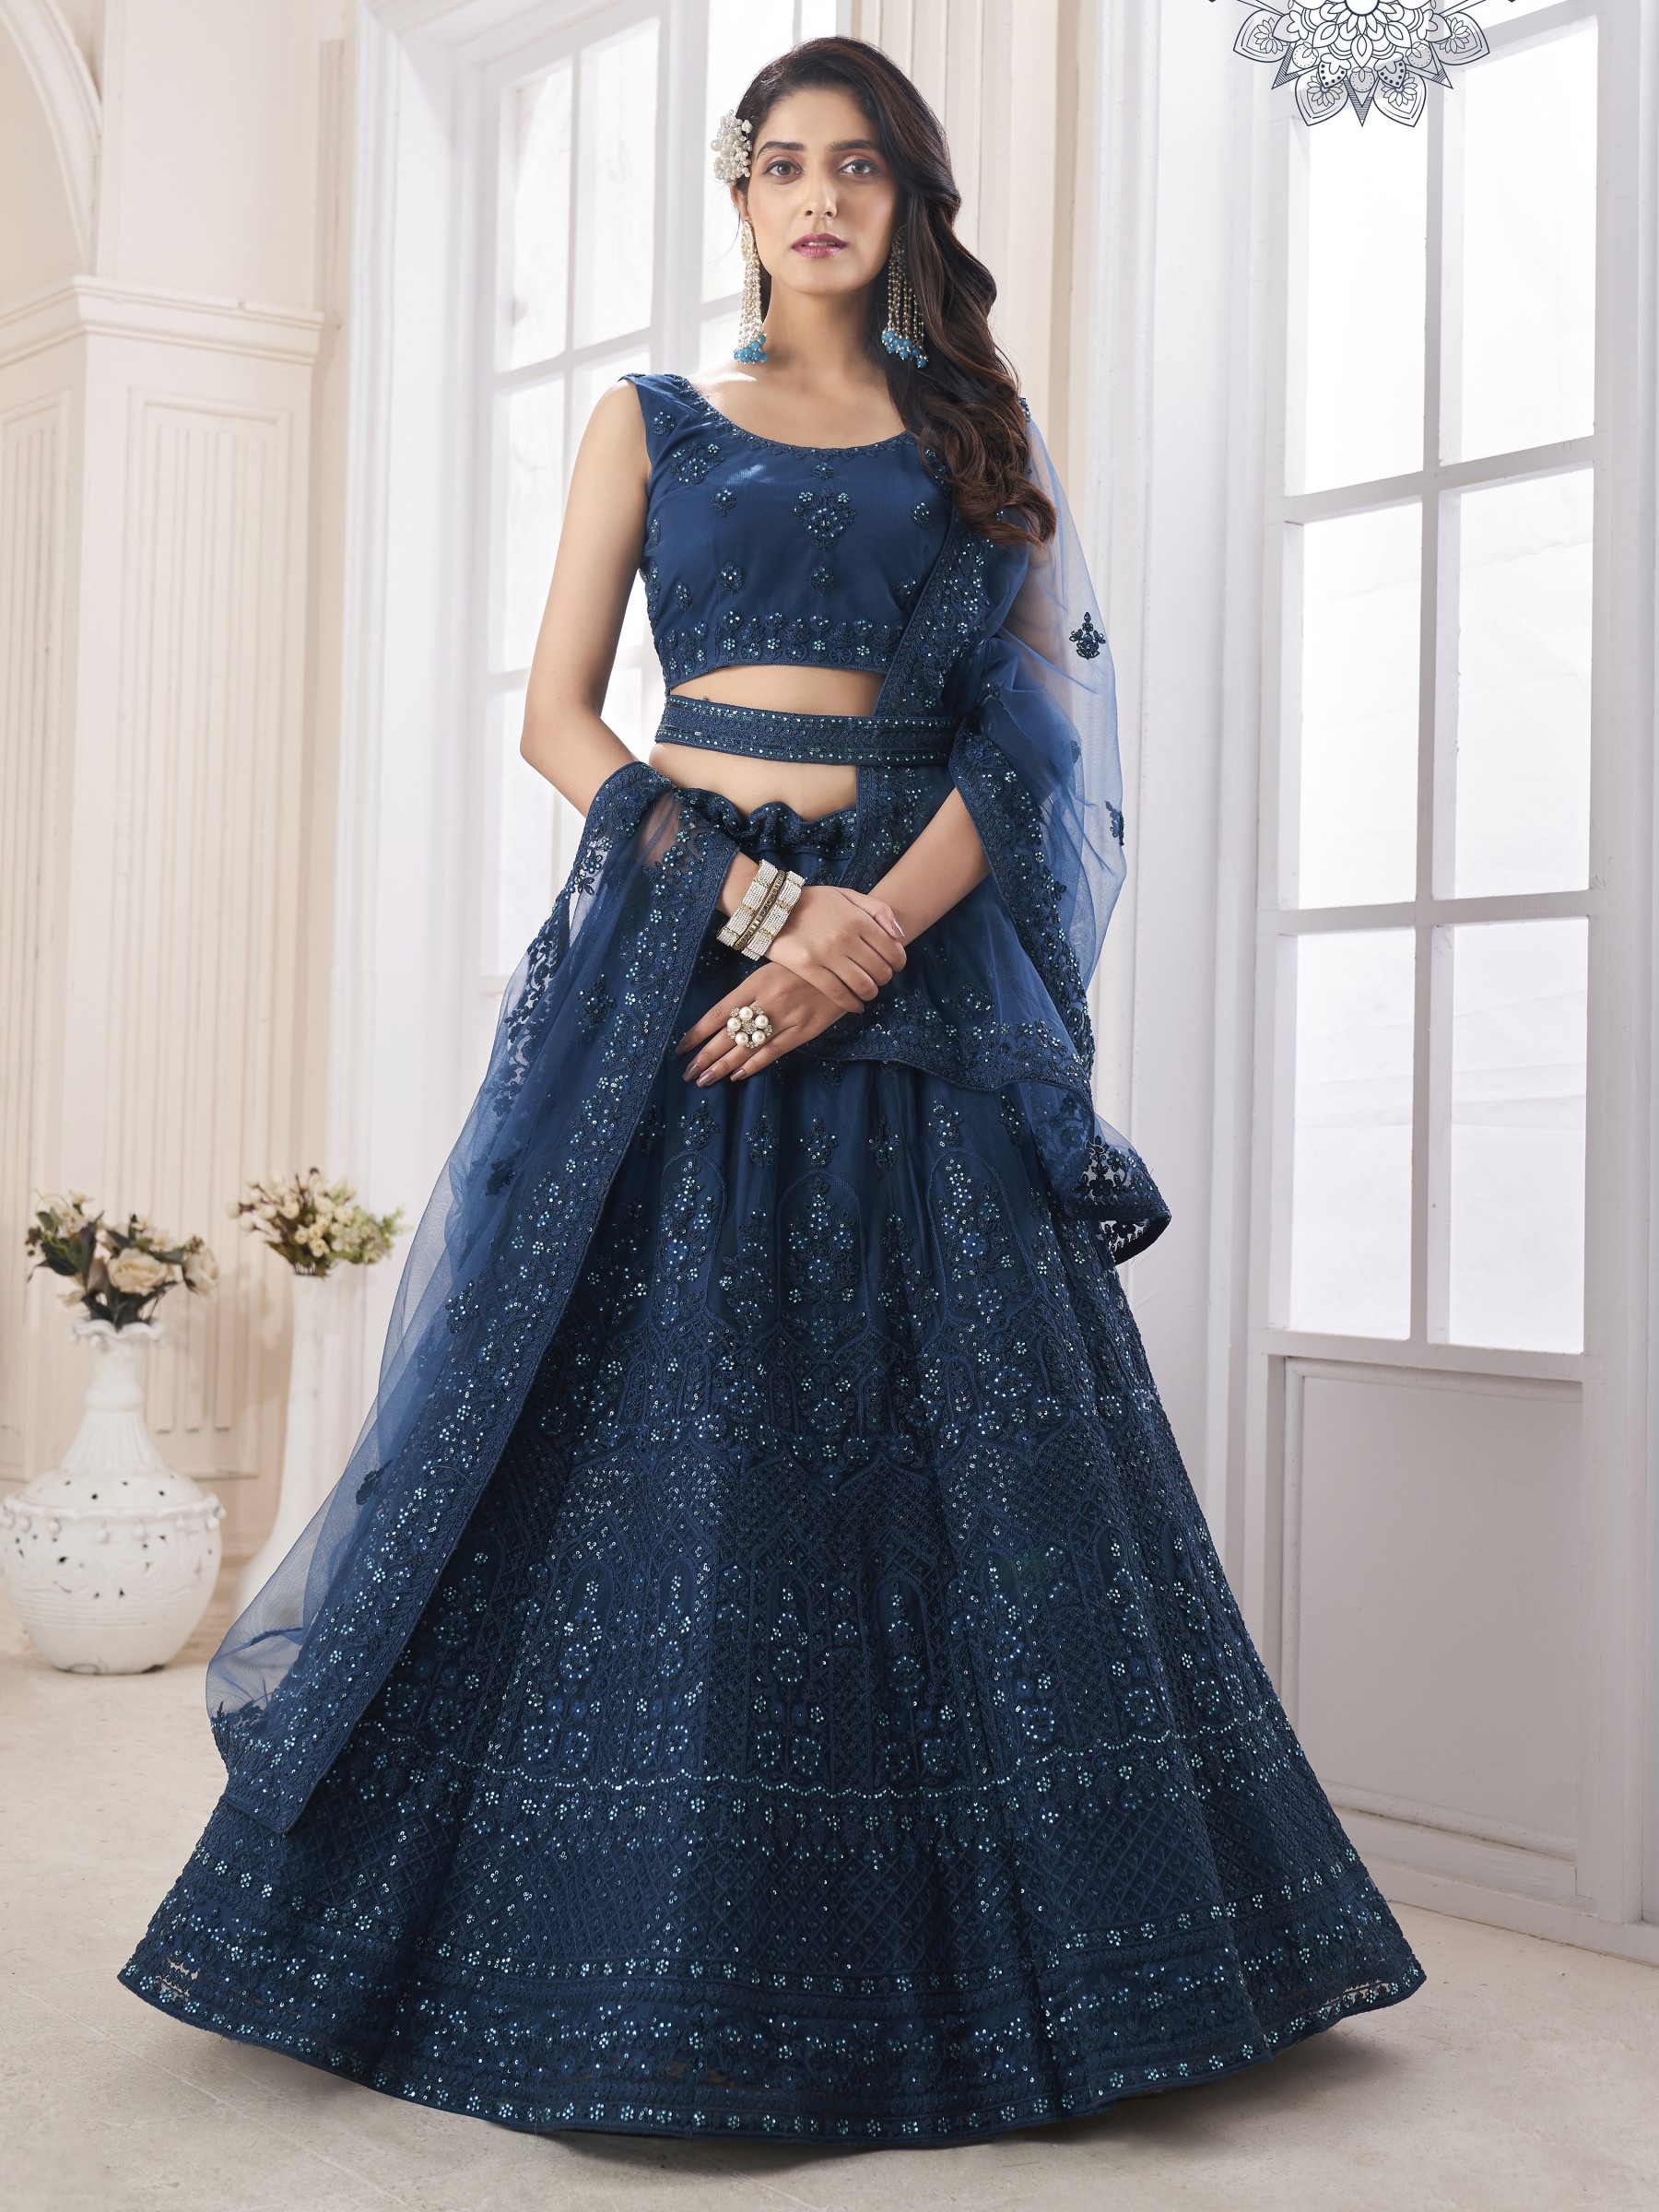 Soft Premium Net Wedding Wear Wear Lehenga In Teal Blue Color With Embroidery Work 